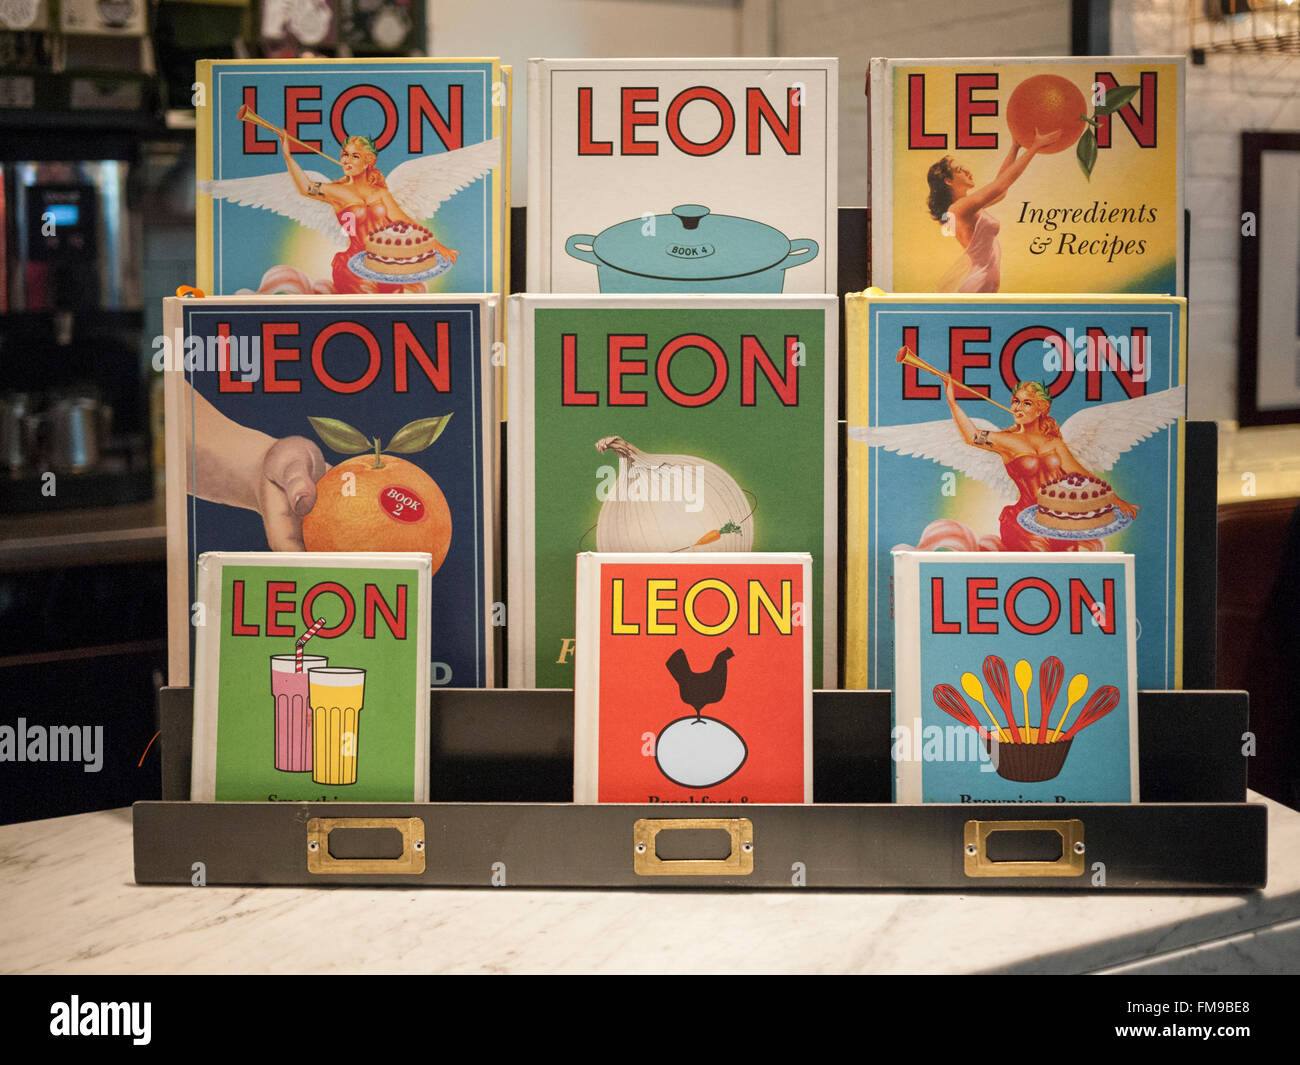 Leon Restaurant cookery books on a rack for sale in a shop Stock Photo